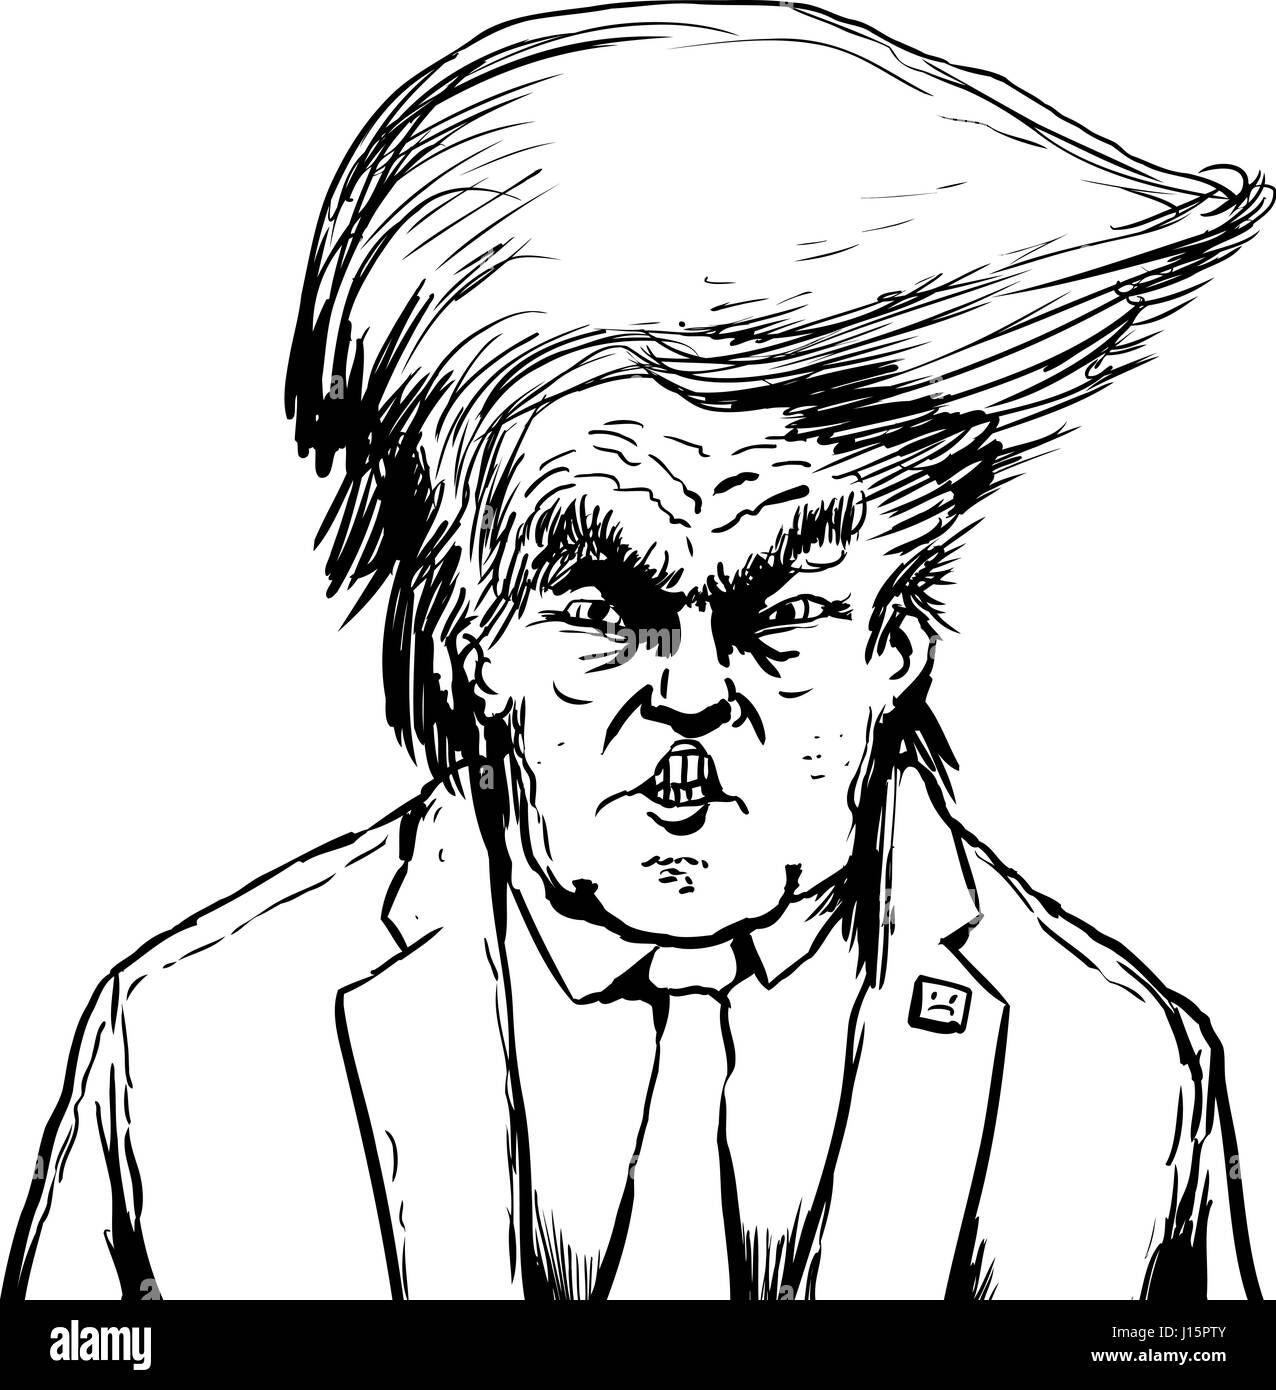 April 18, 2017. Outlined caricature of angry Donald Trump with Bouffant hairdo Stock Photo